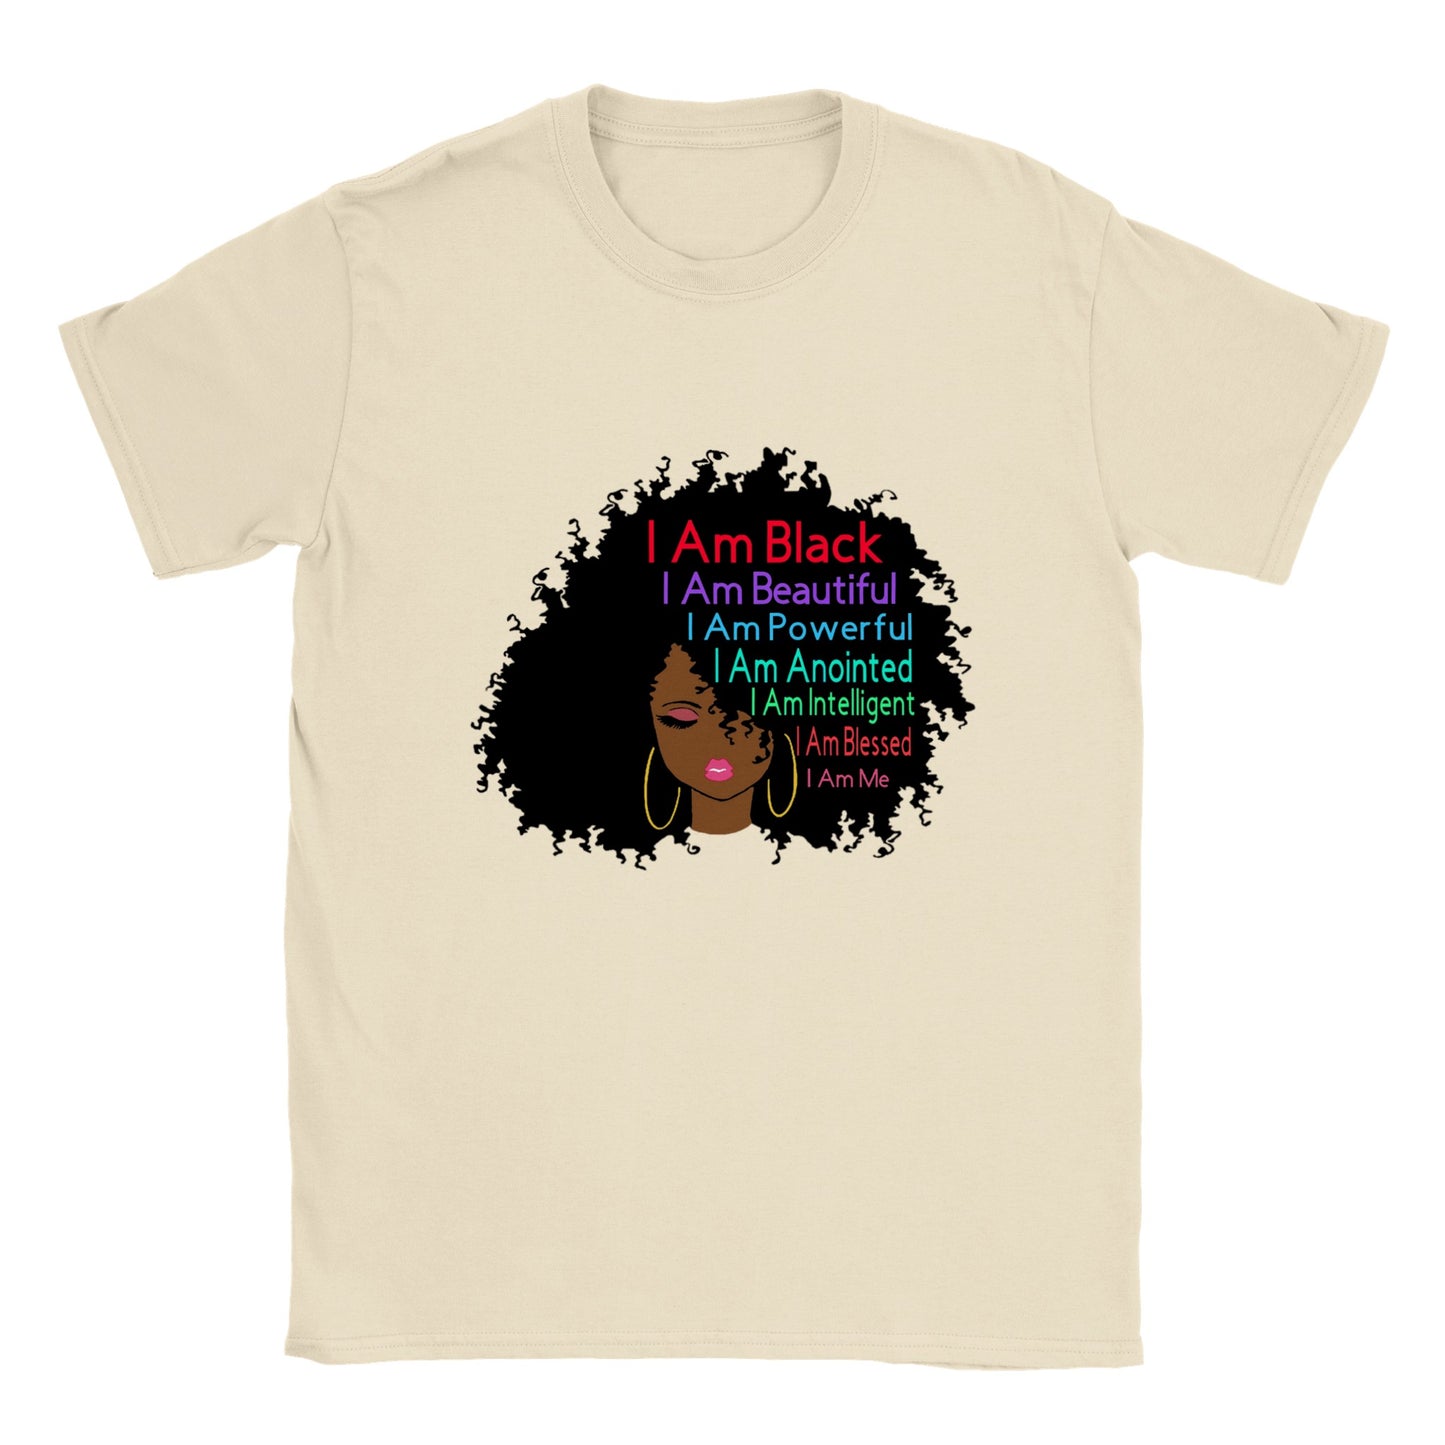 I Am Black, Beautiful, Powerful, Anointed, Intelligent, Blessed T-shirt